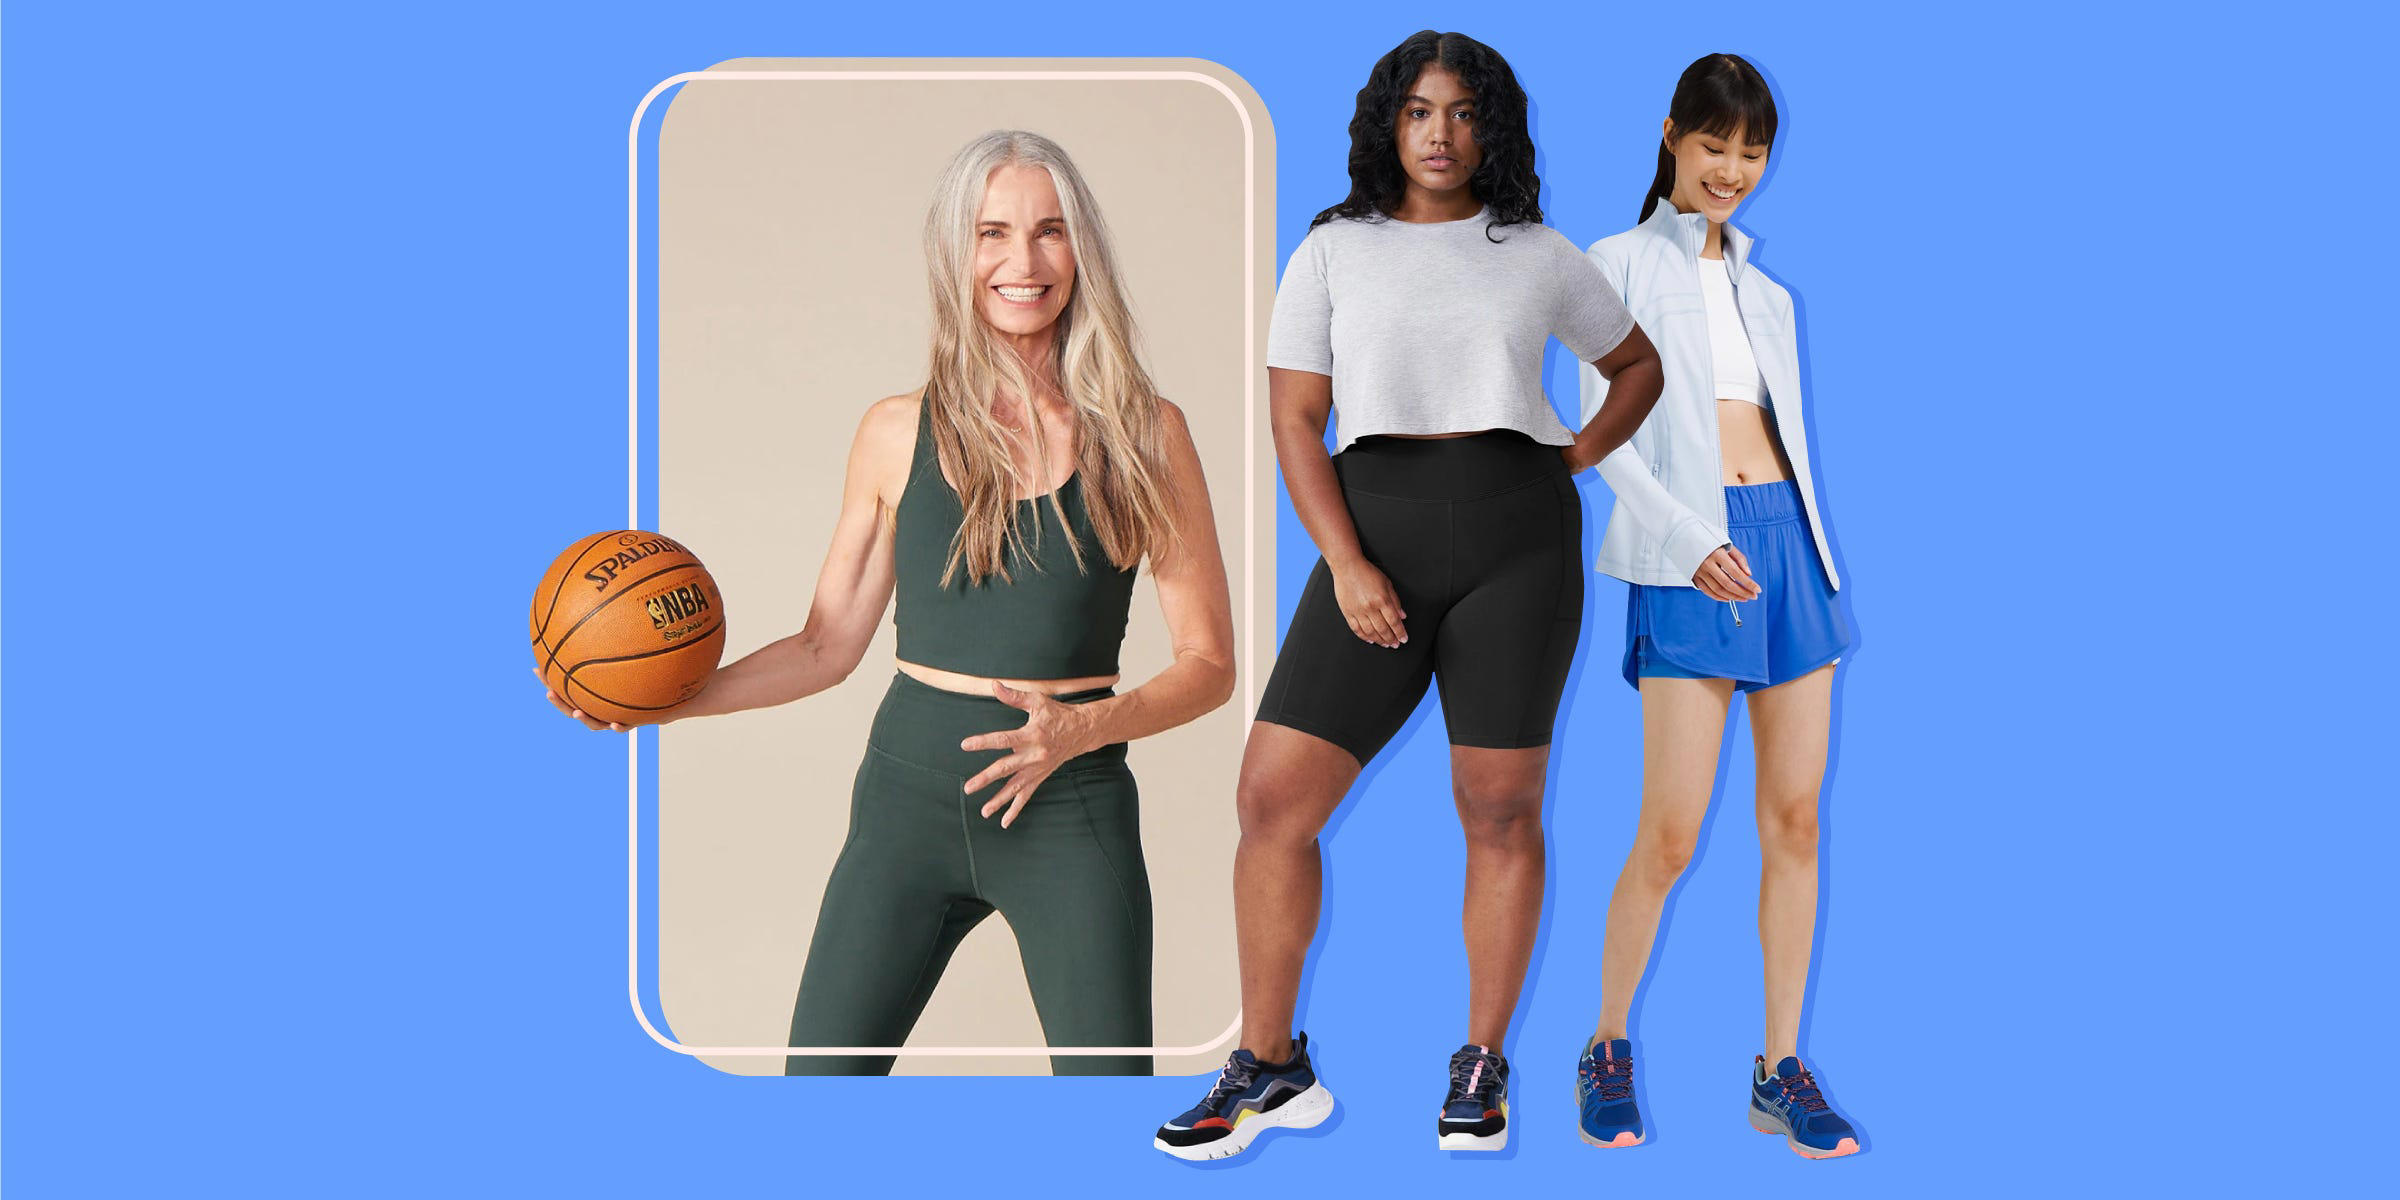 The 8 best workout clothing brands for women